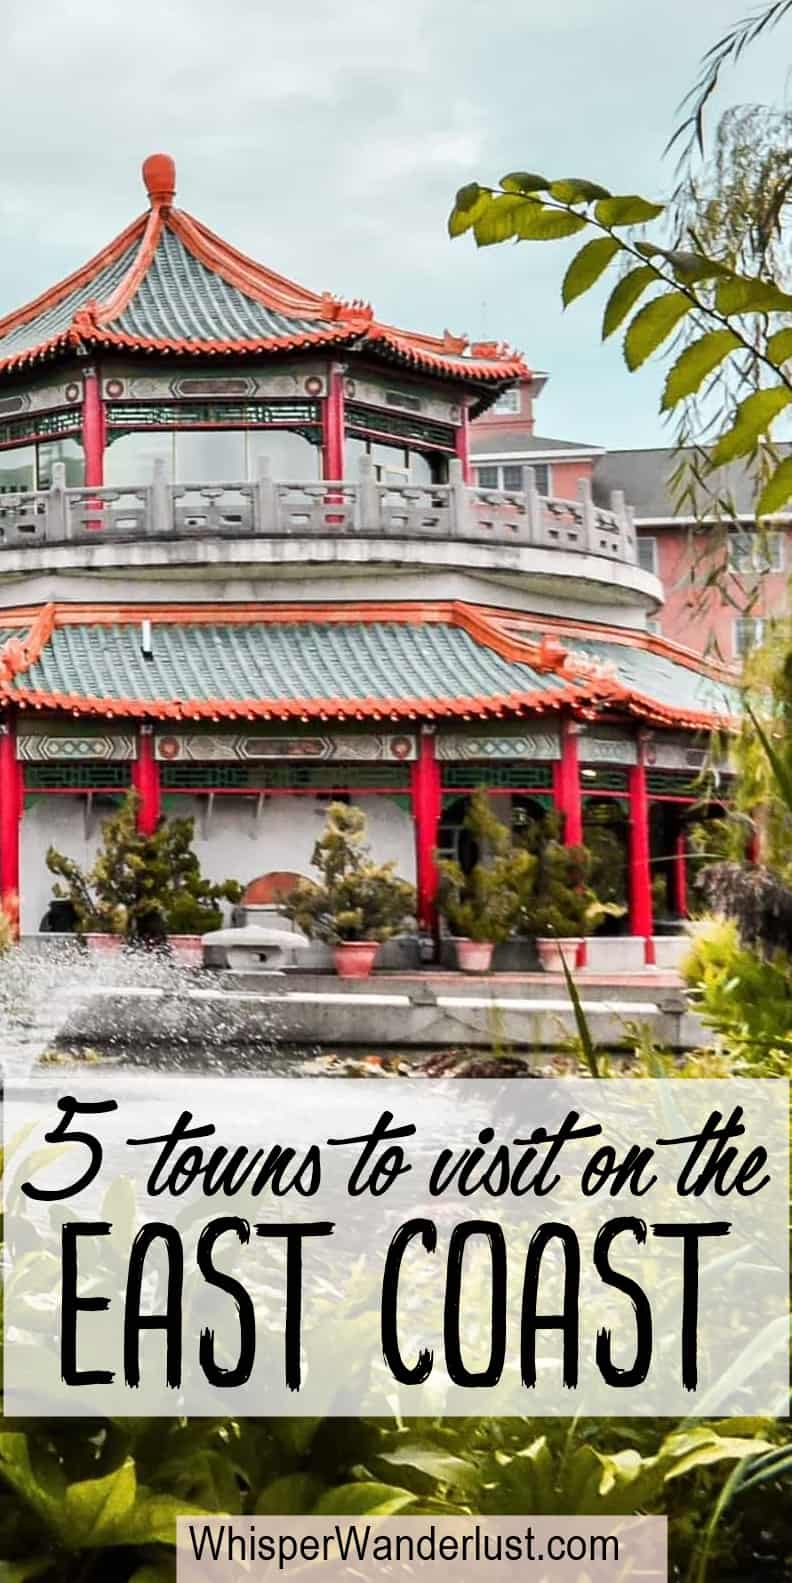 towns to visit on the east coast